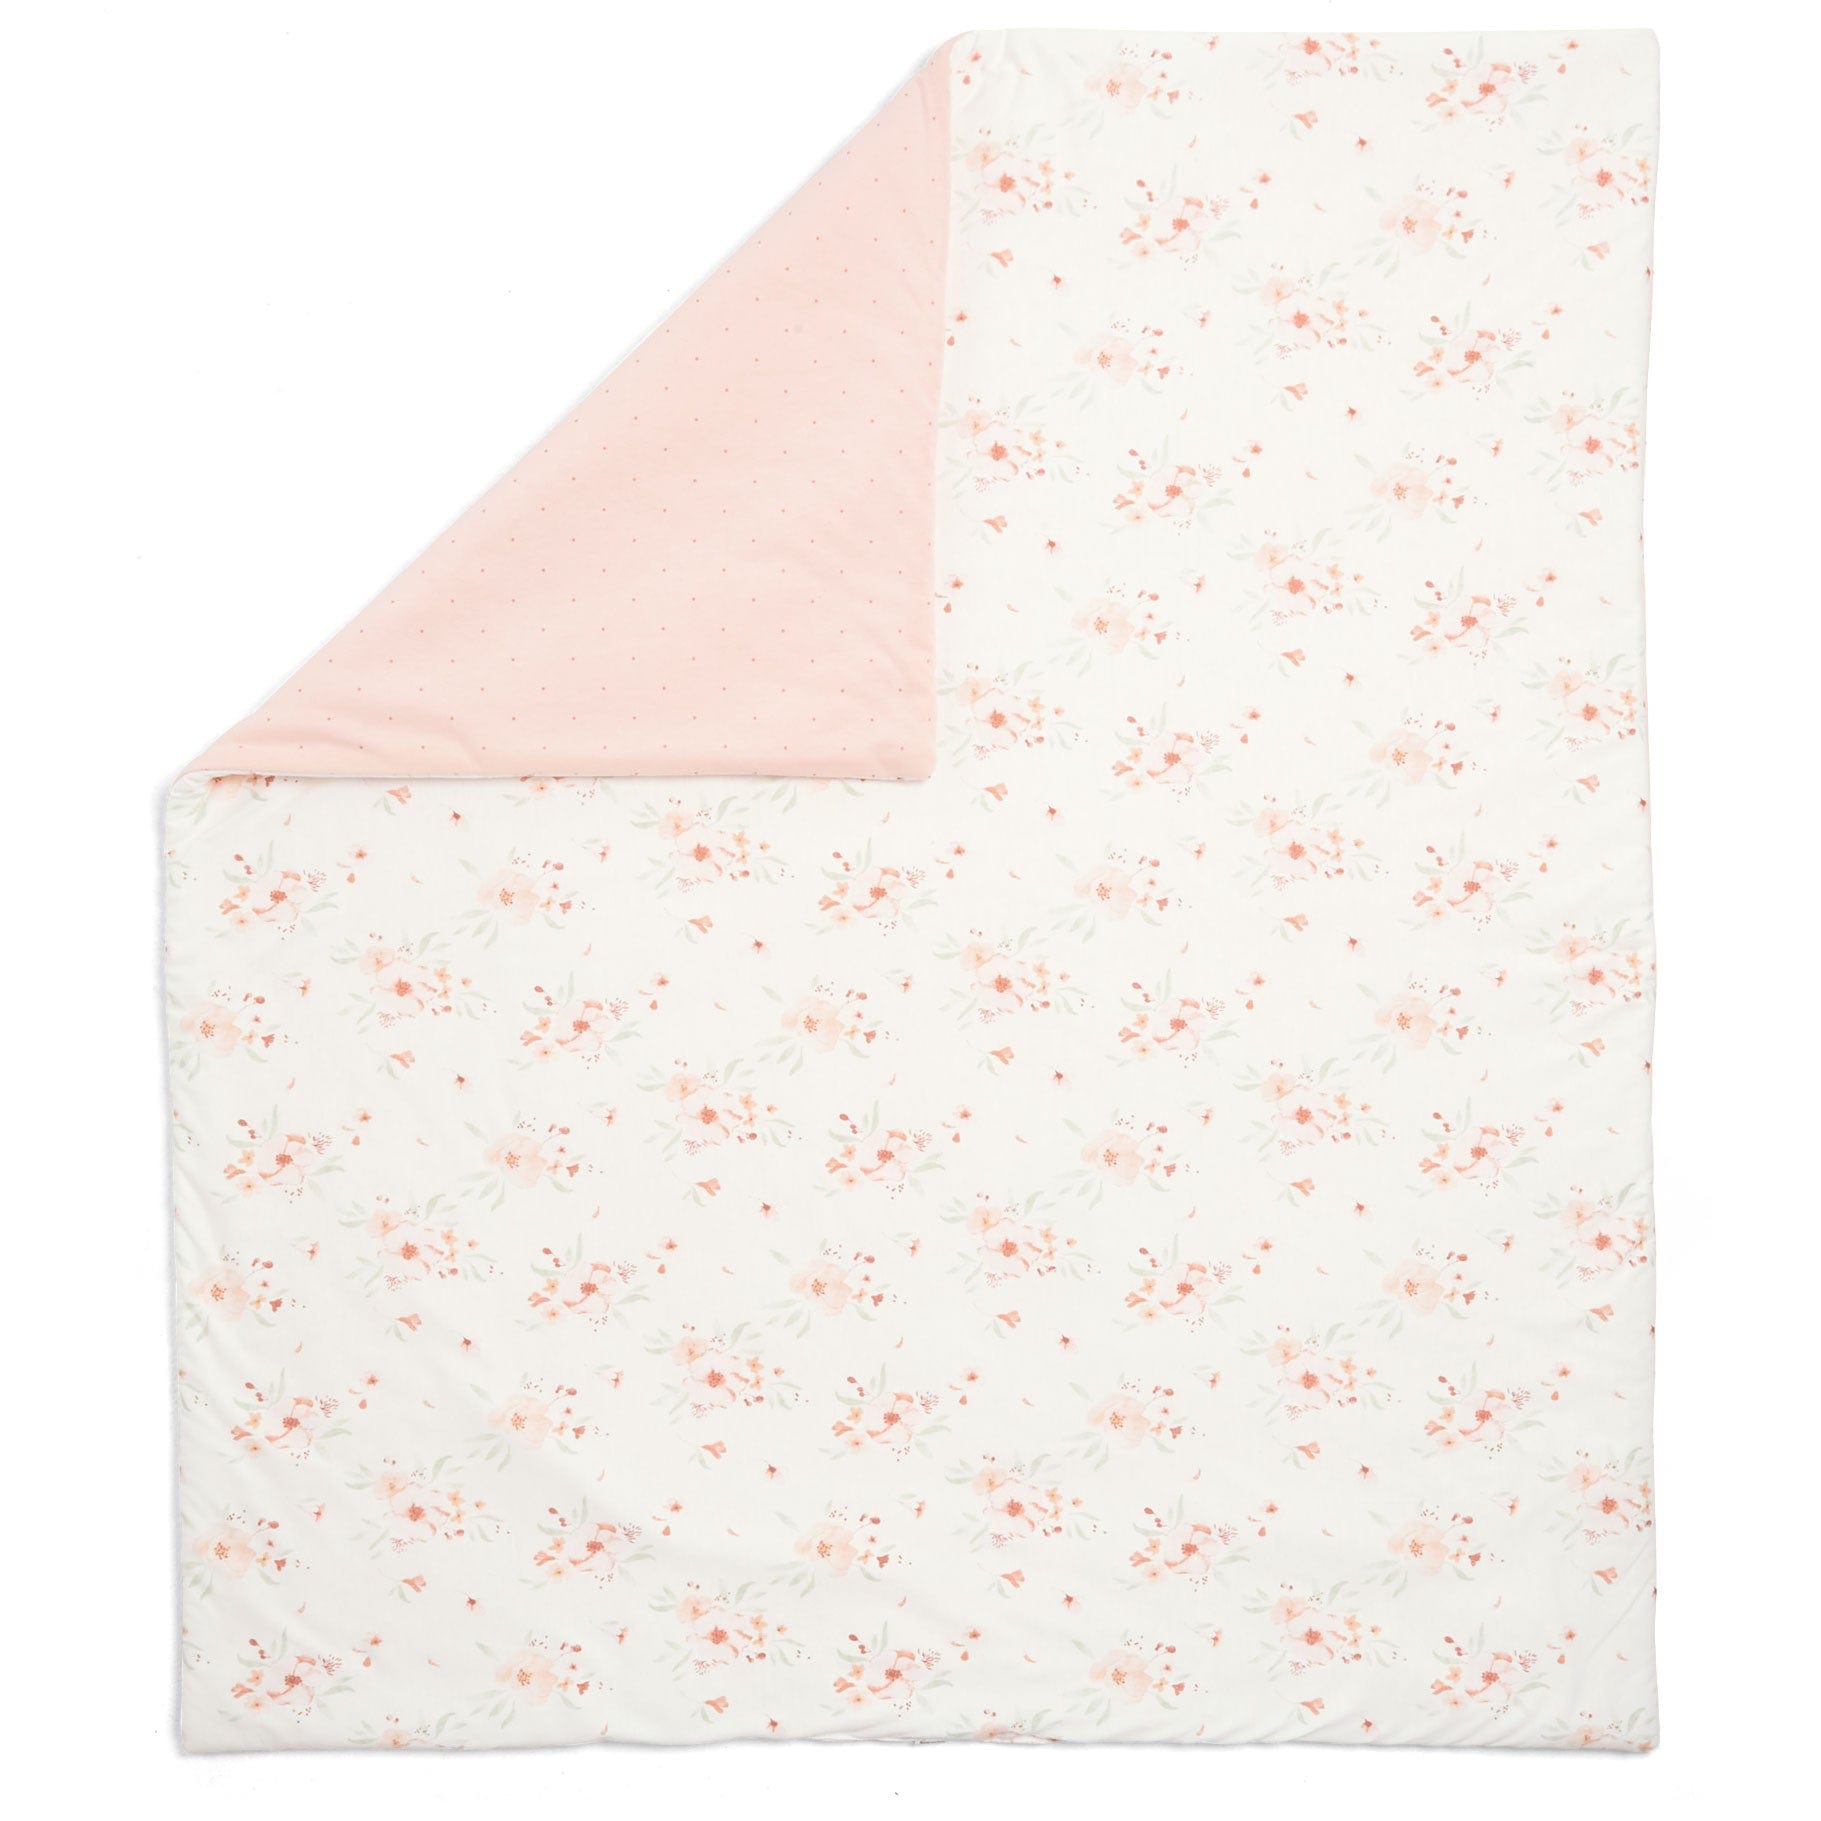 M&P Welcome to the World Cot Bed Quilt in Floral Spot Cot & Cot Bed Quilts 7041X1600 5057232013303